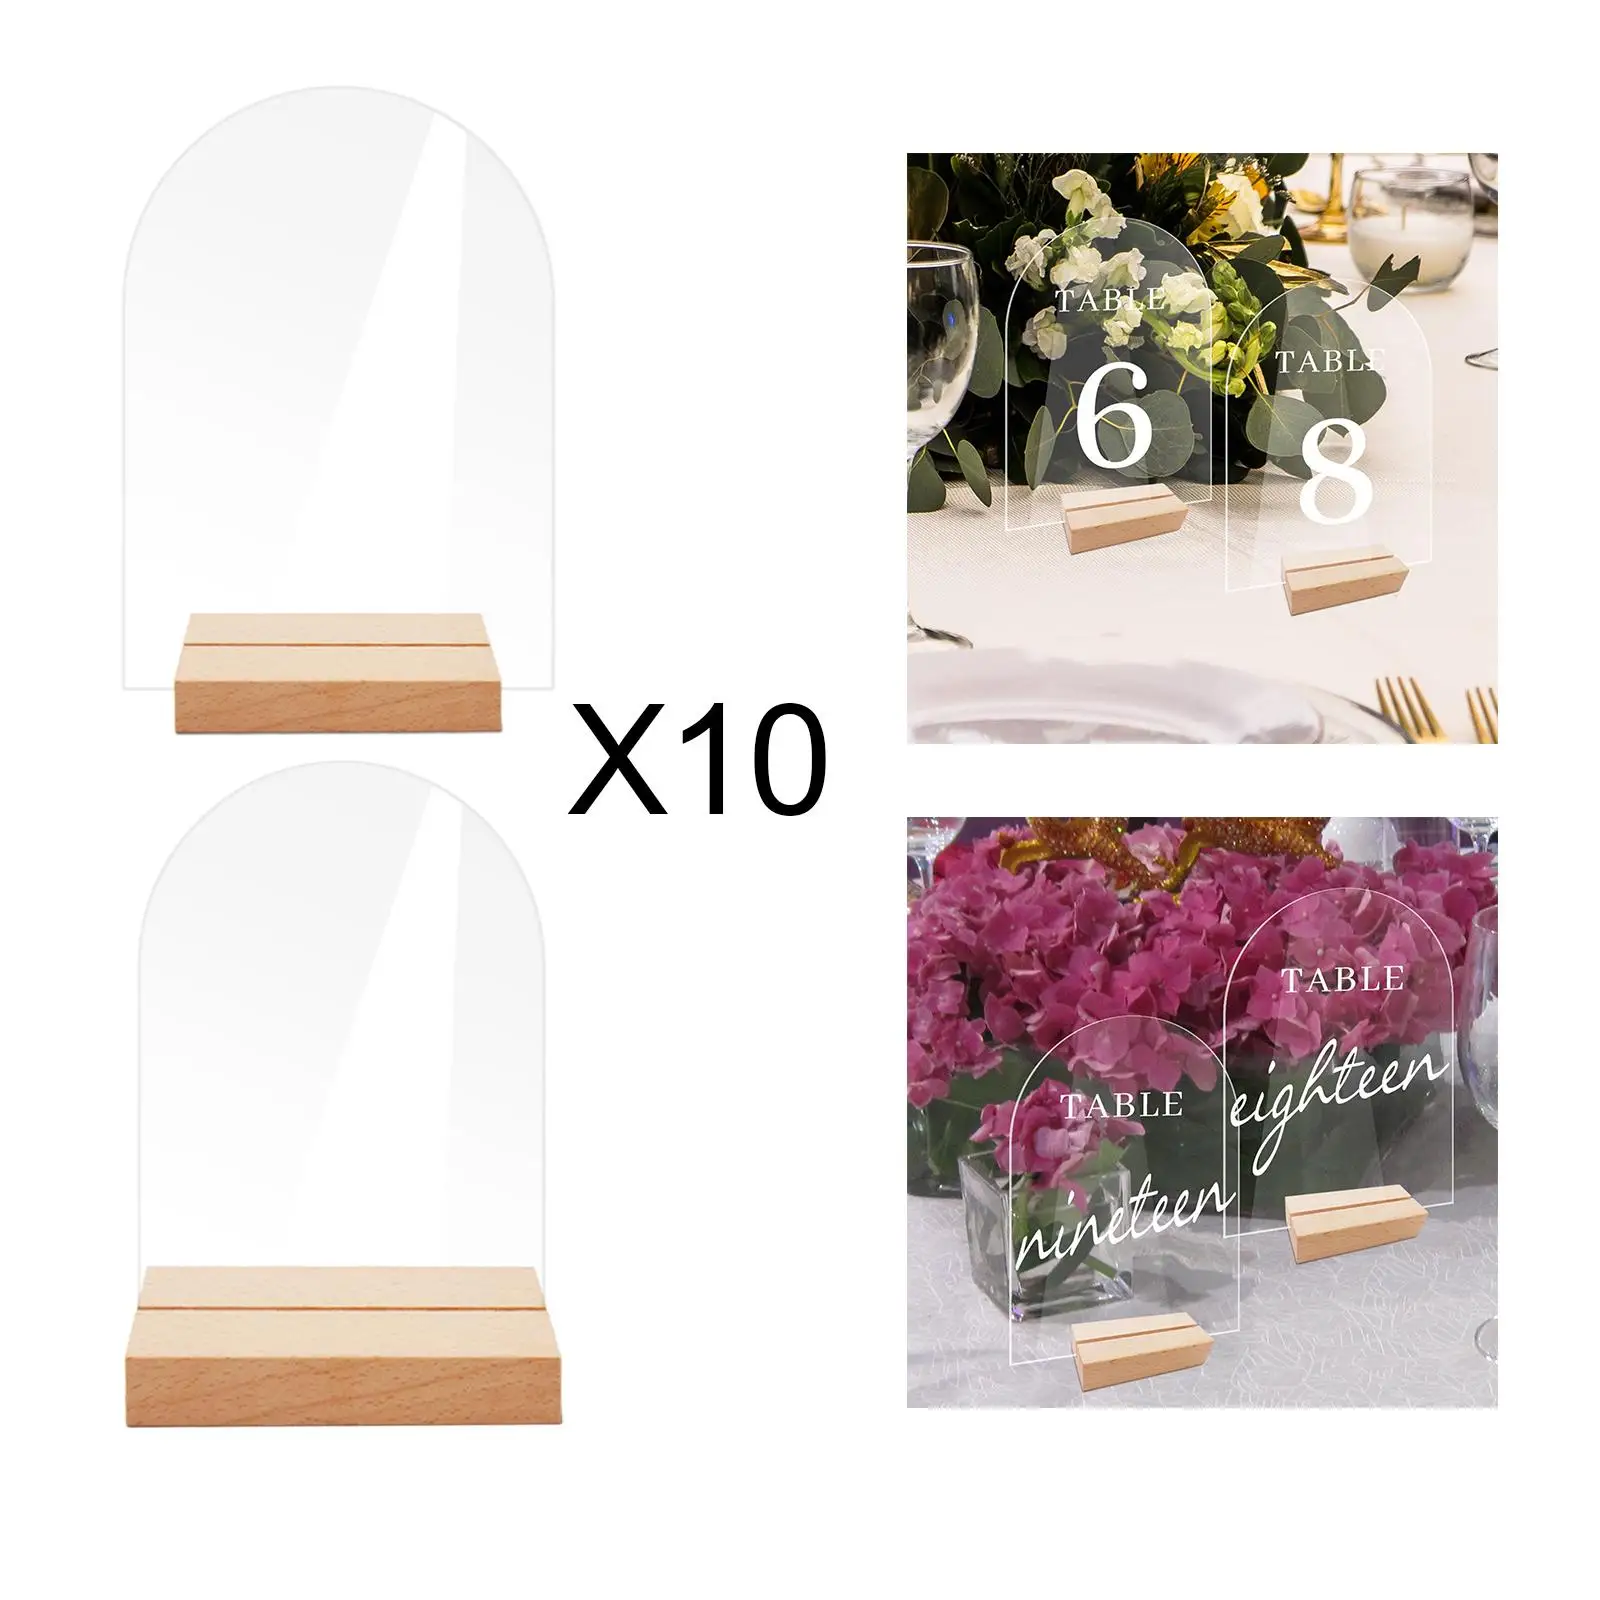 10x Clear Acrylic Place Cards Name Signs Cards Seating Cards DIY Table Numbers